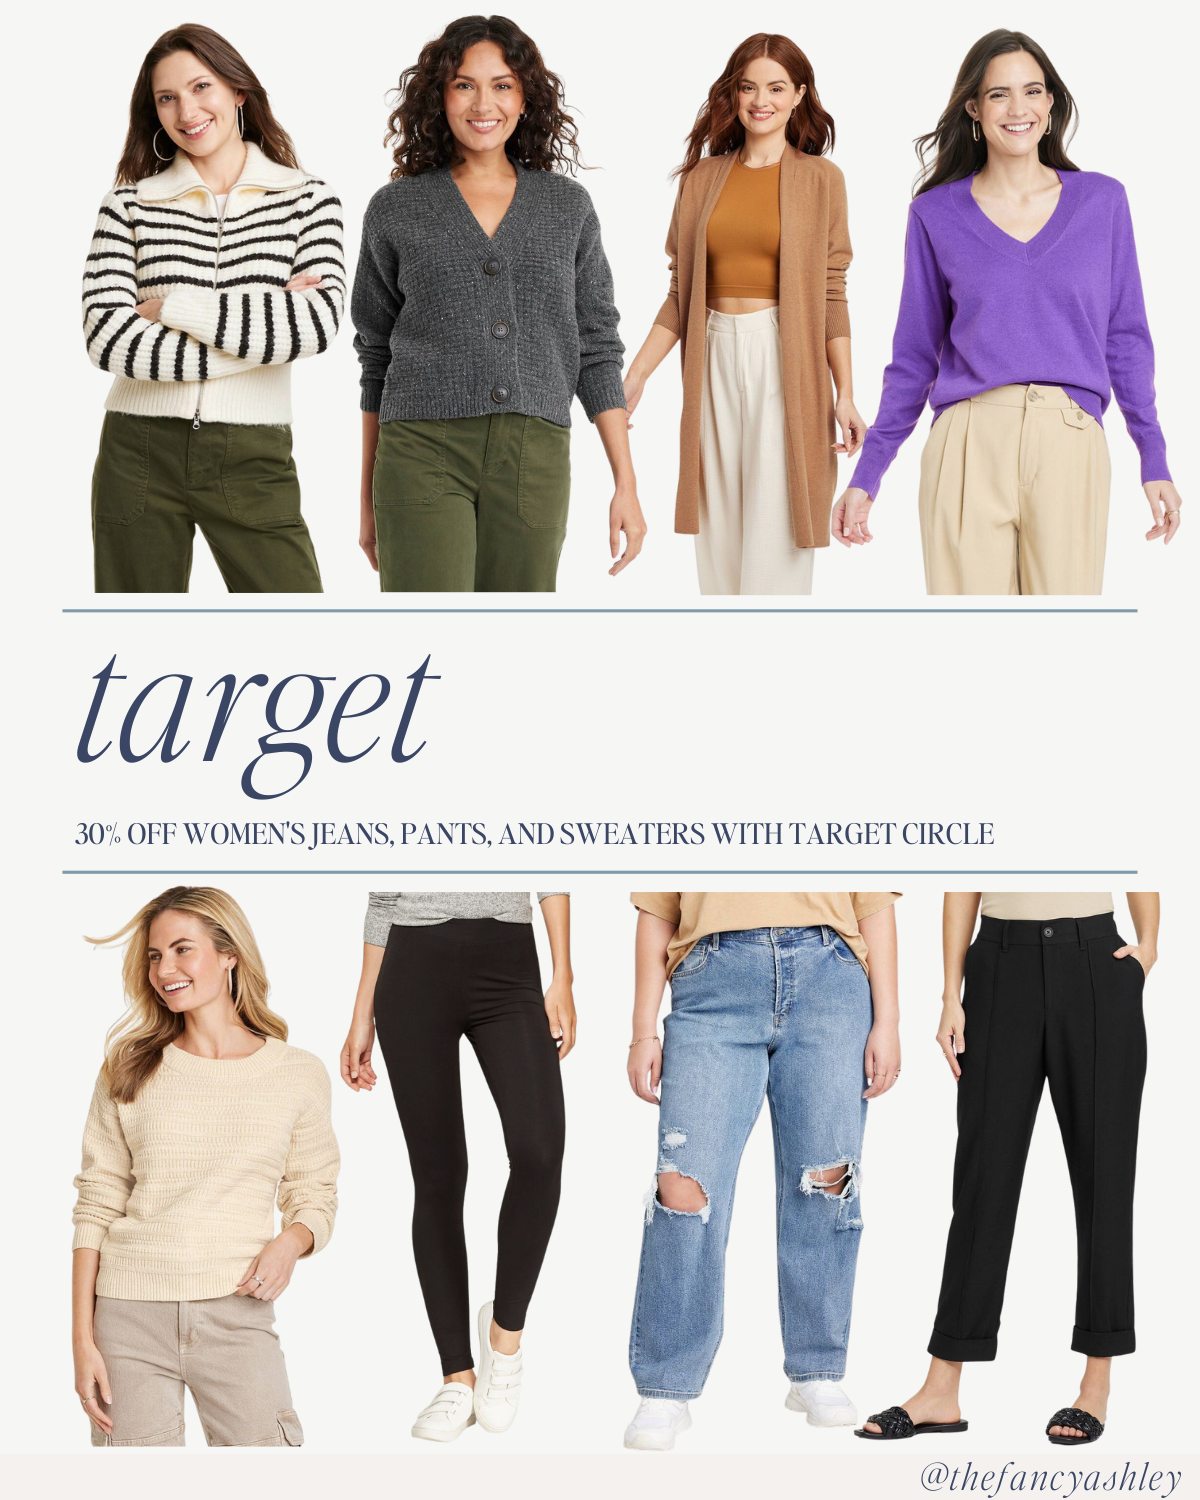 Best Deals From Target's Circle Week Sale 2023